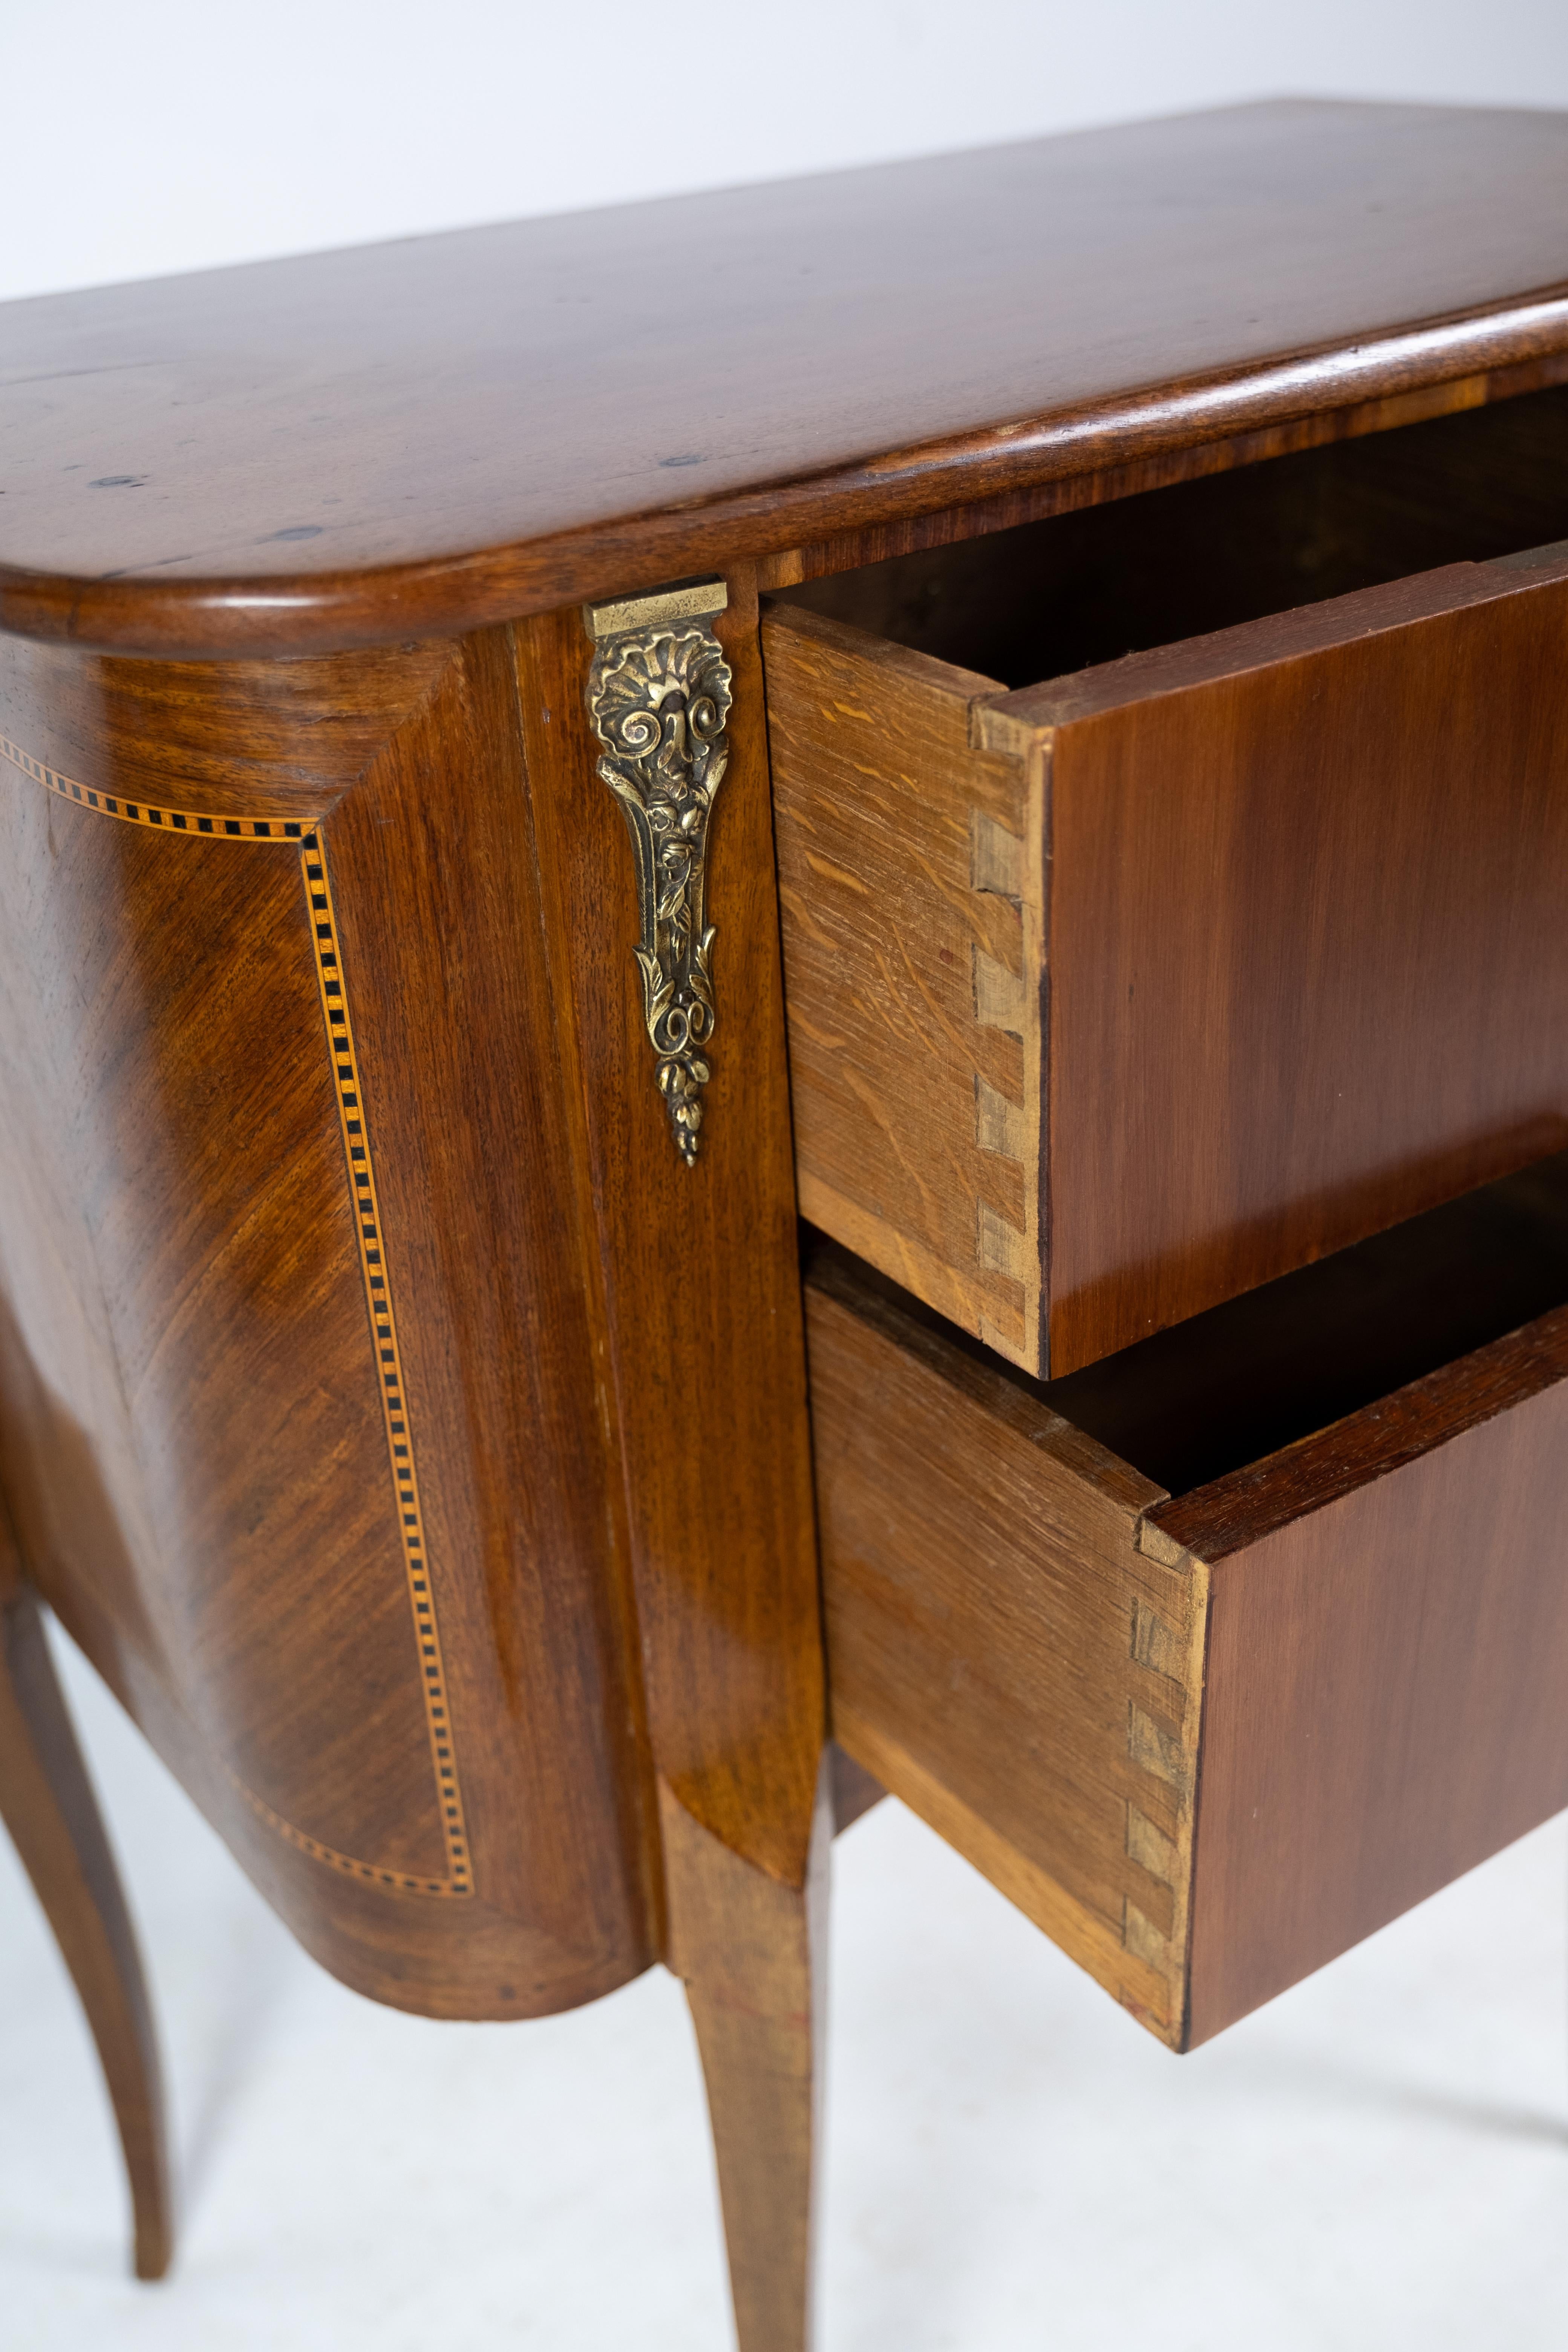 Small chest of drawers in hand-polished mahogany from around the 1890s

This product will be inspected thoroughly at our professional workshop by our educated employees, who assure the product quality.